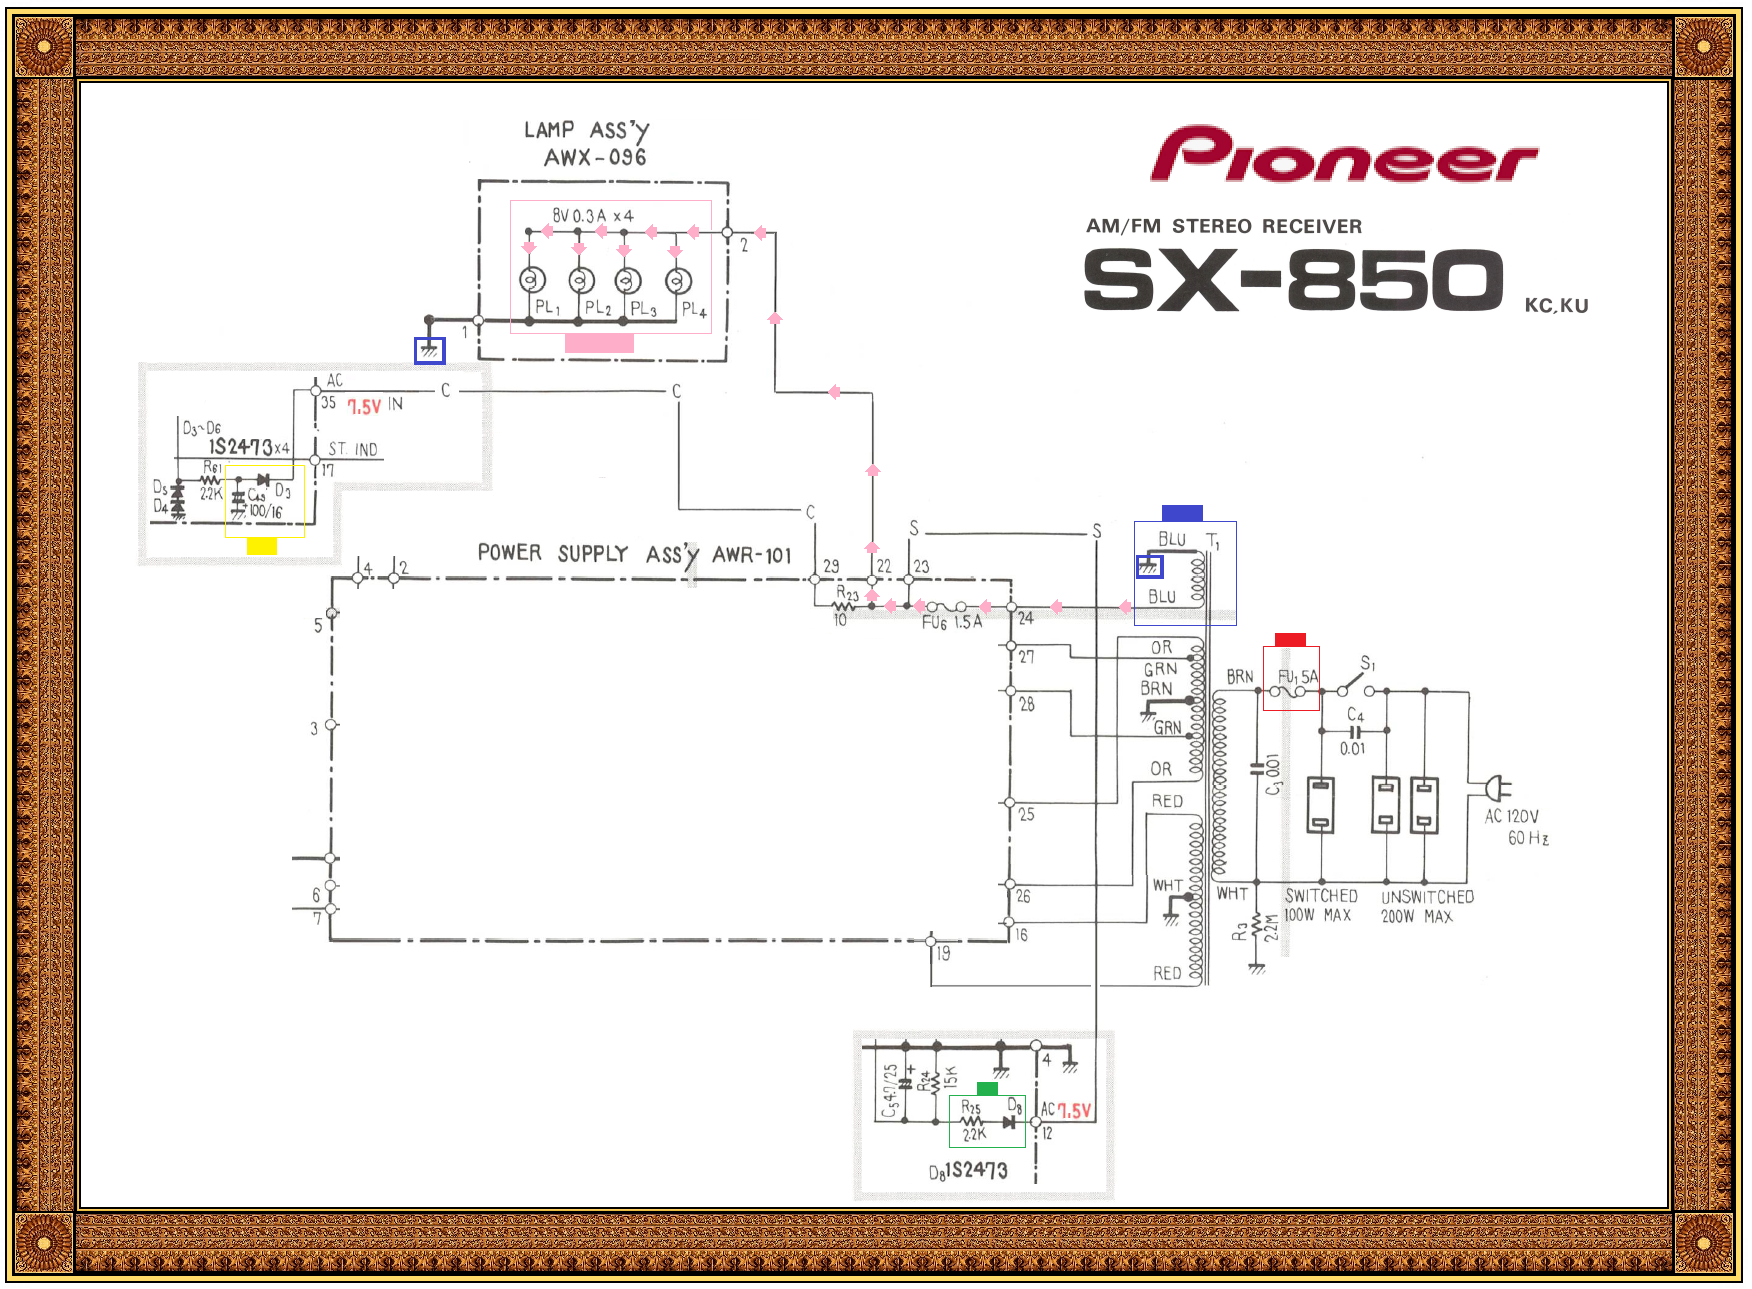 Pioneer-SX-850-Lamp-Supply.png